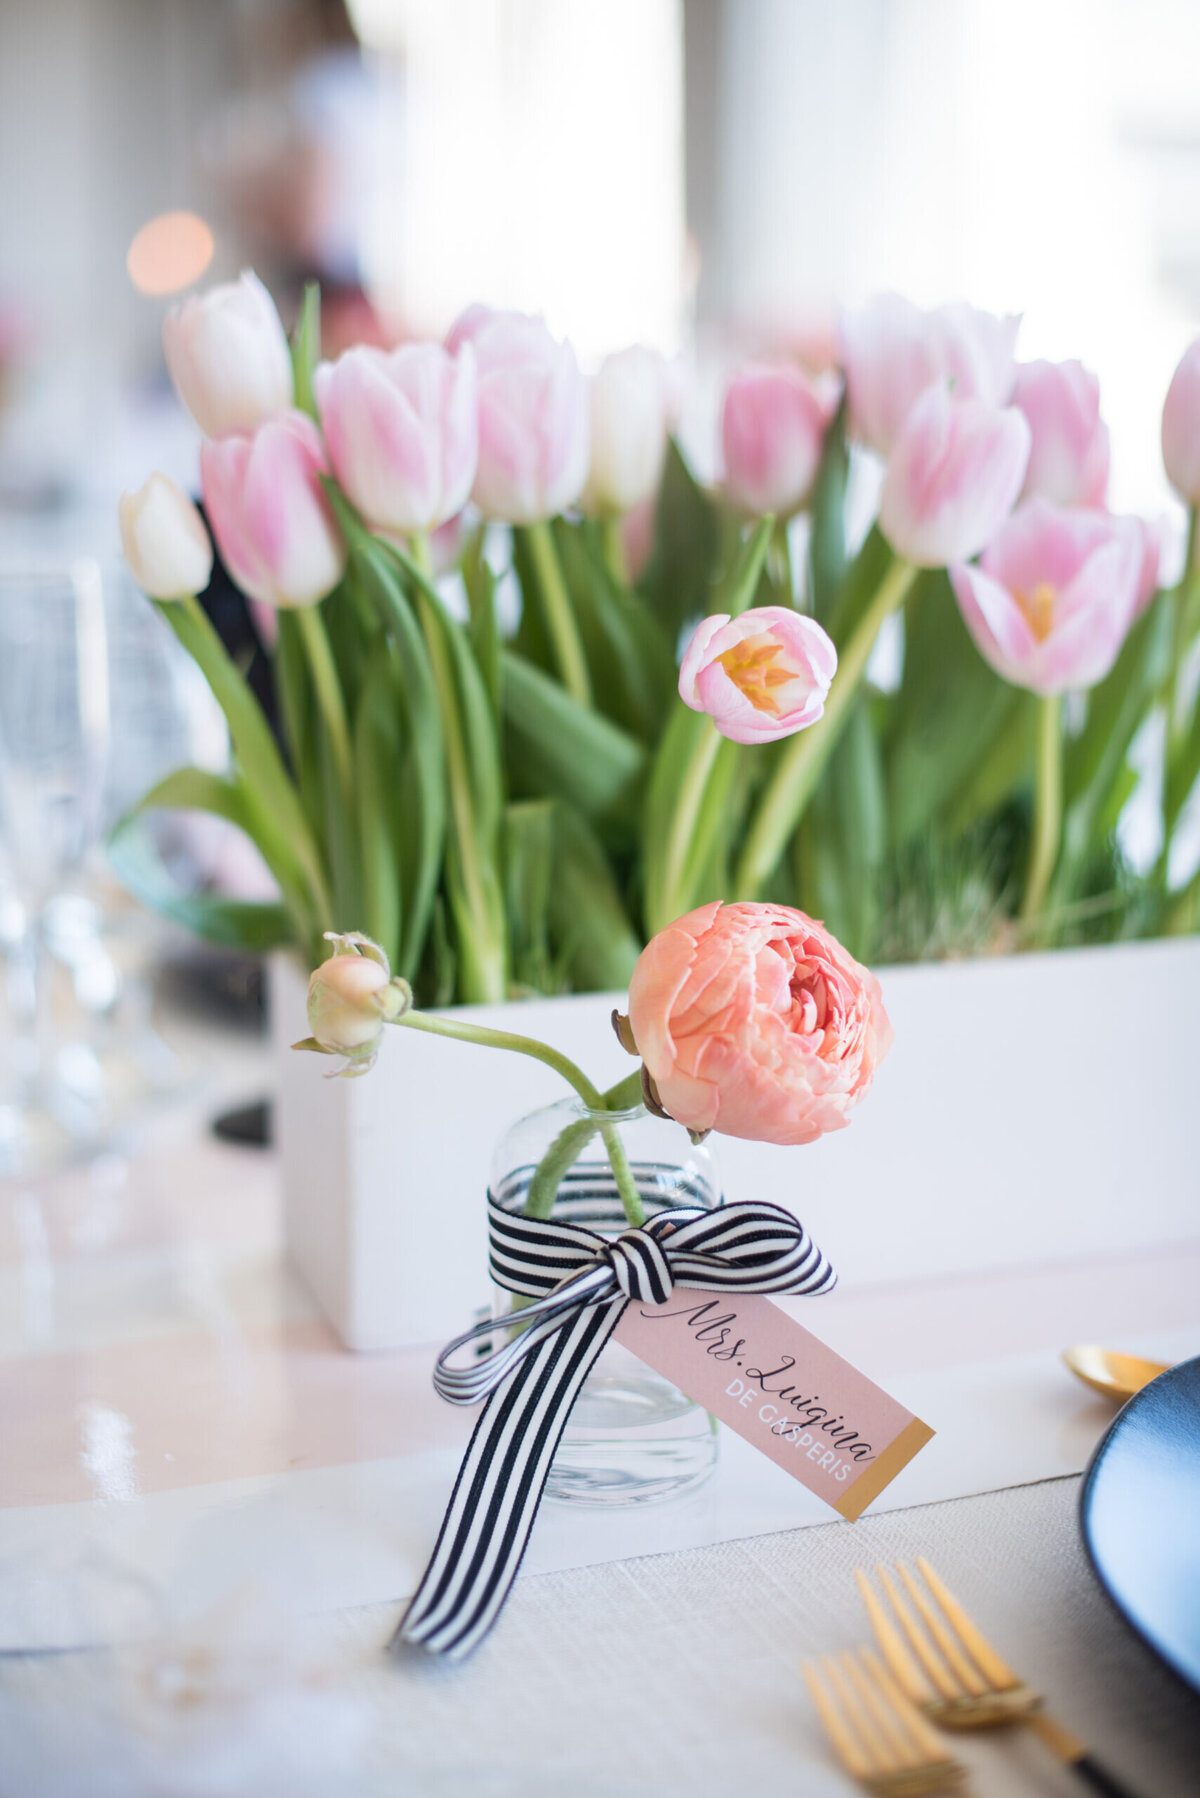 Diana-Pires-Events-Copper-Creek-Bridal-Shower-0001-23-scaled